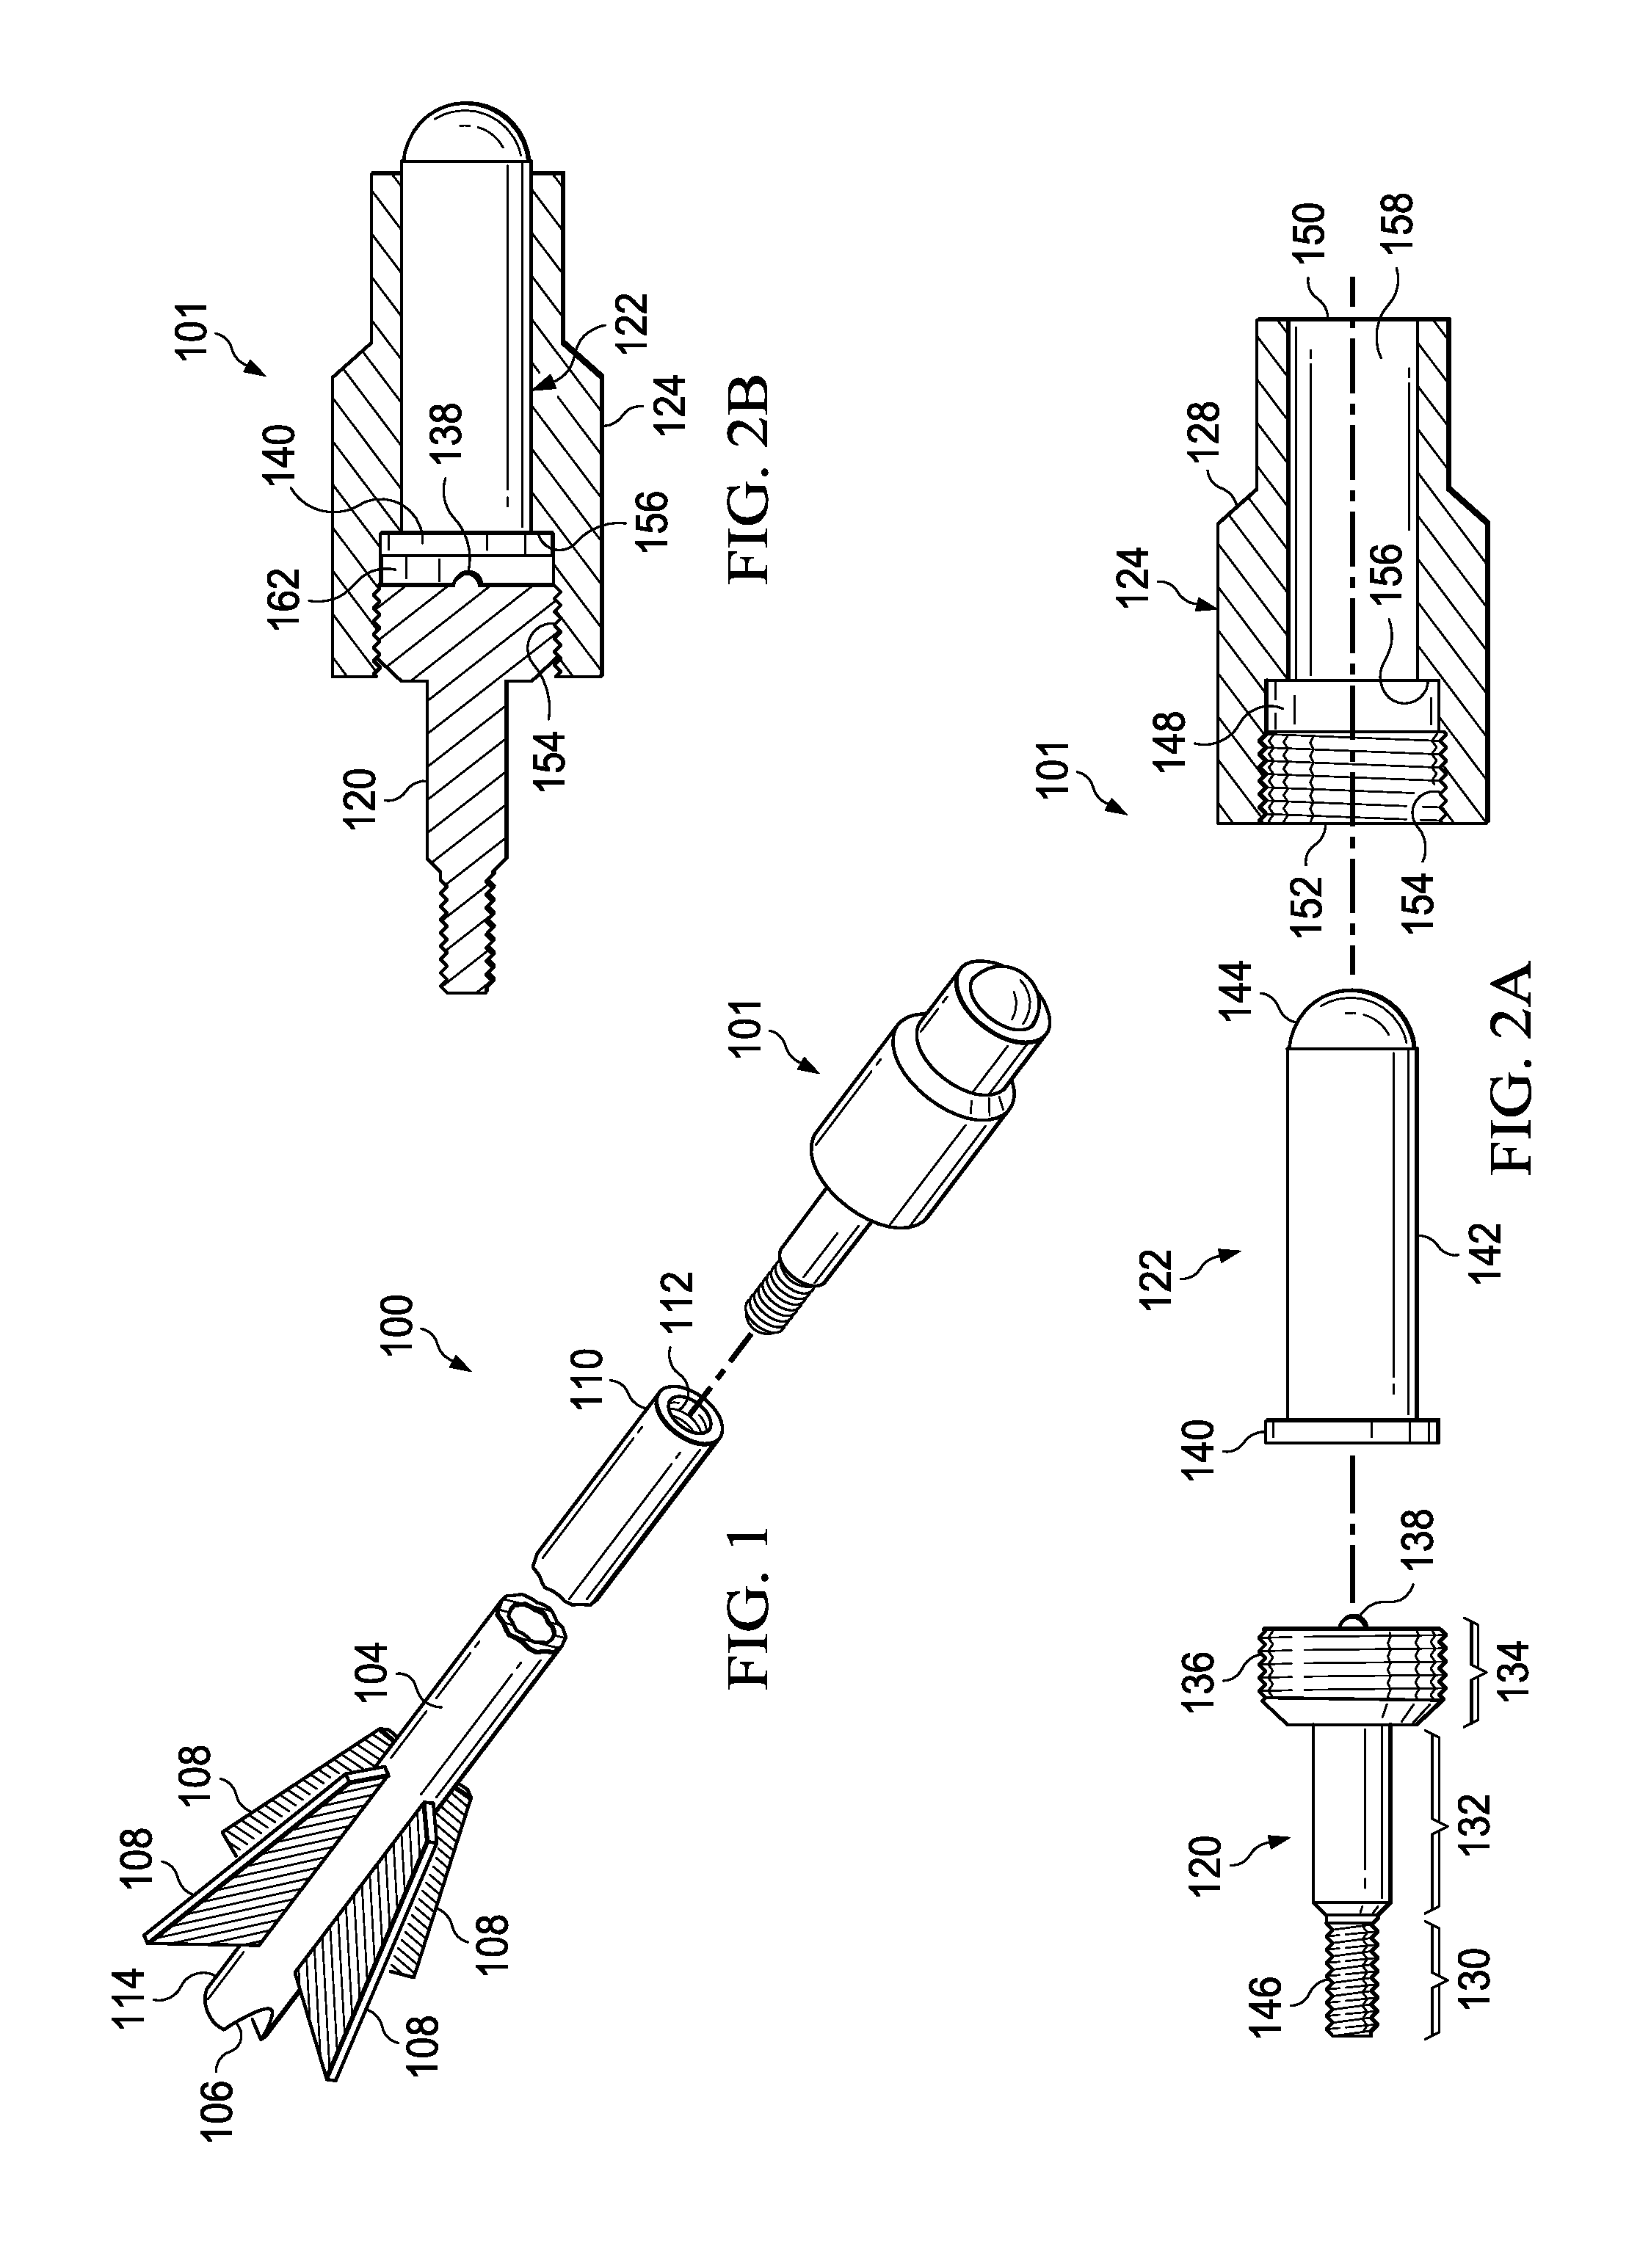 Ammunition Delivery System Arrowhead and Method of Use